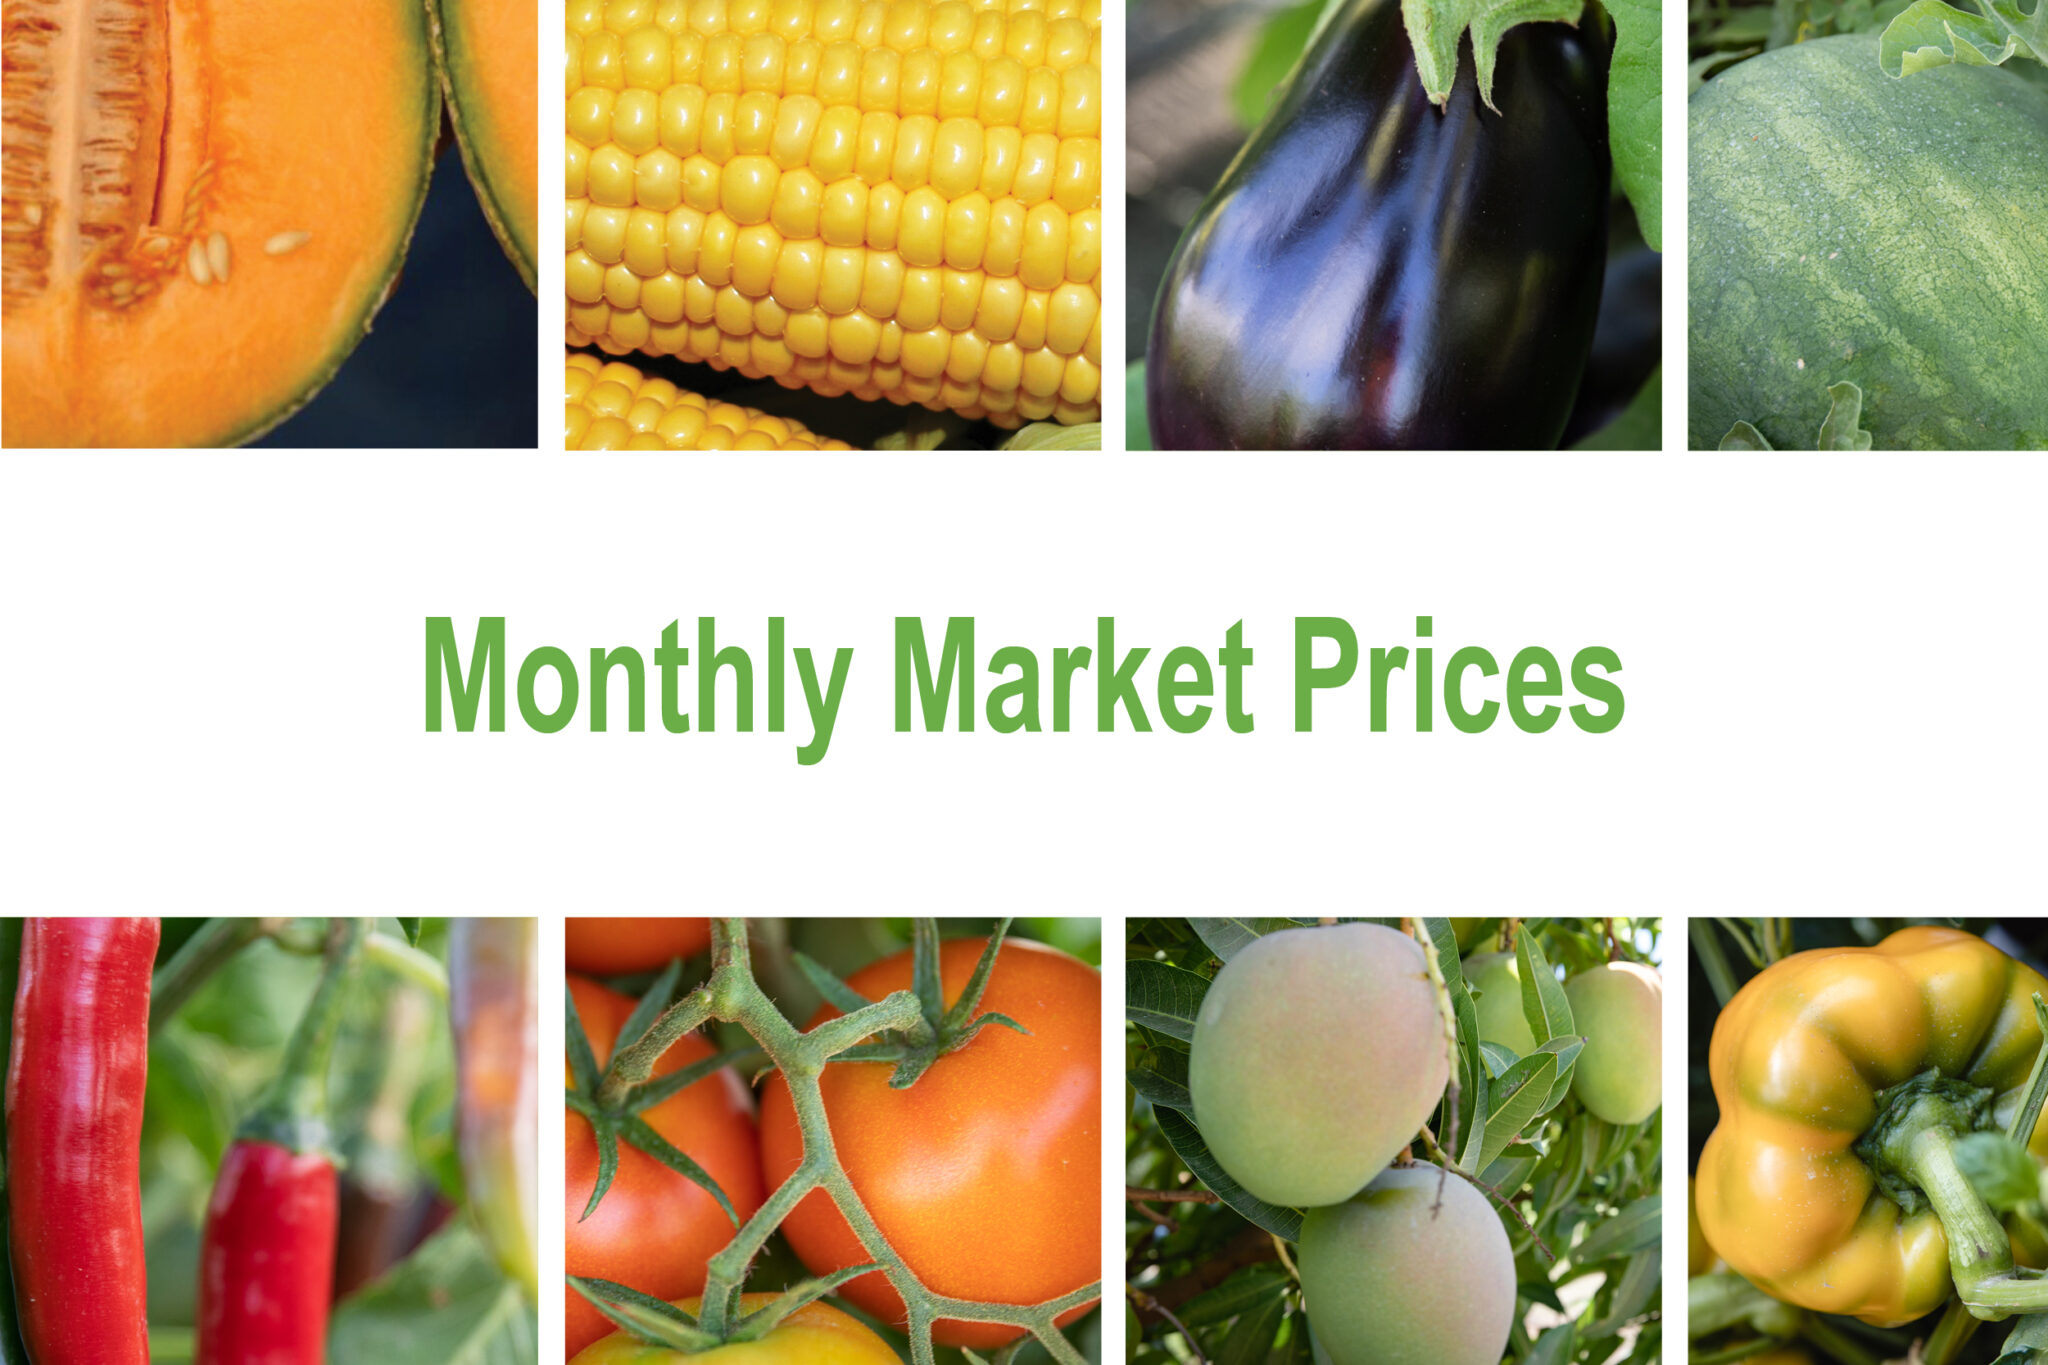 Monthly market prices